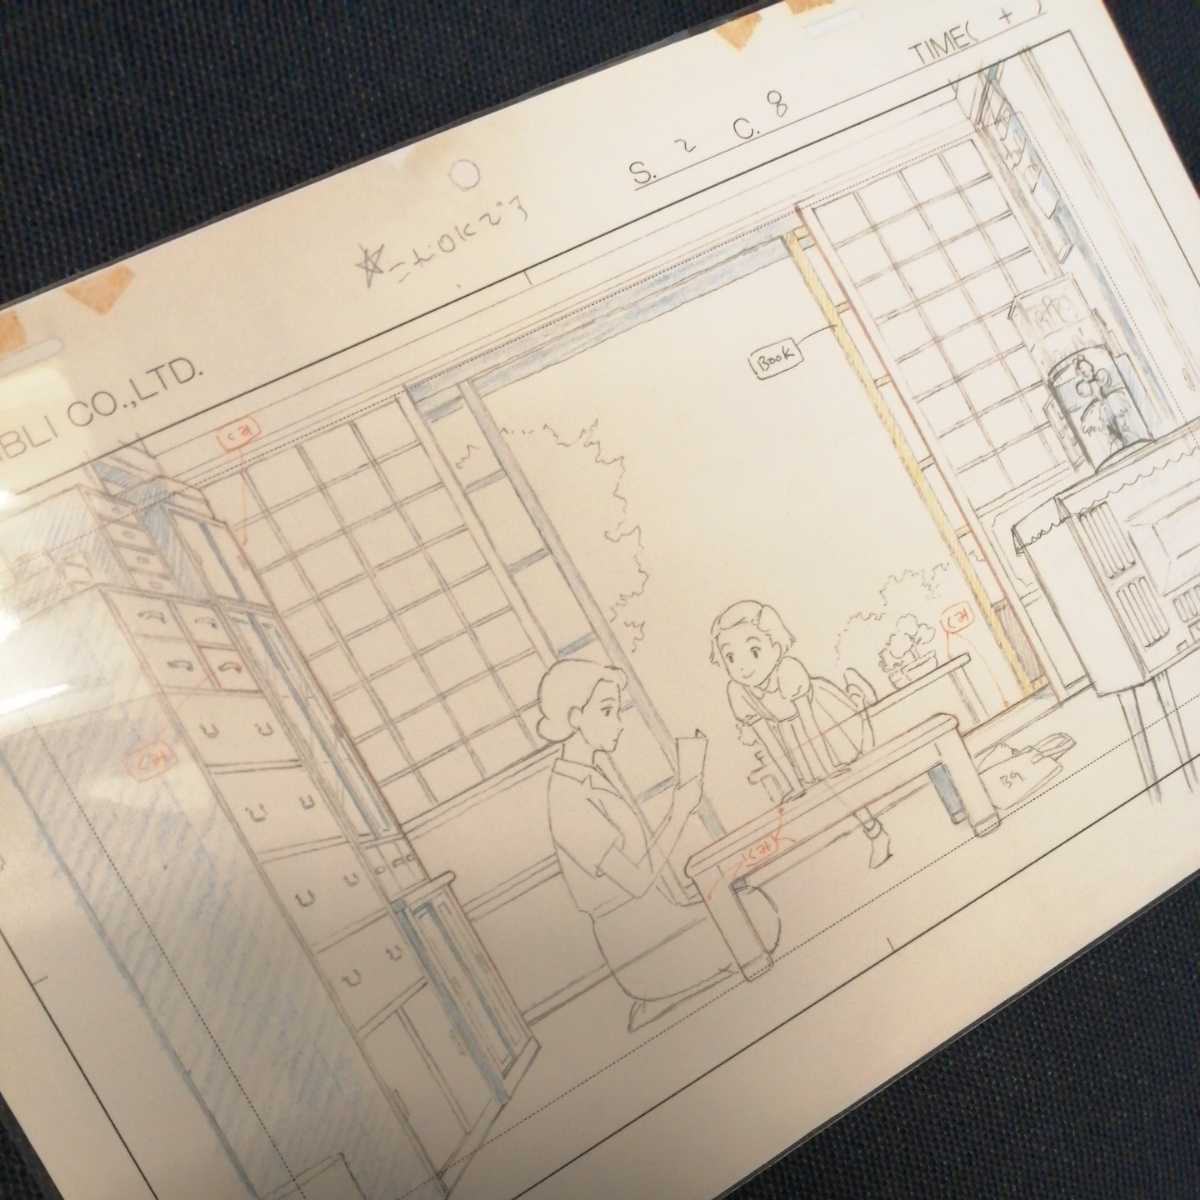  Studio Ghibli ........ layout cut . inspection ) Ghibli postcard poster original picture cell picture layout exhibition Miyazaki .n